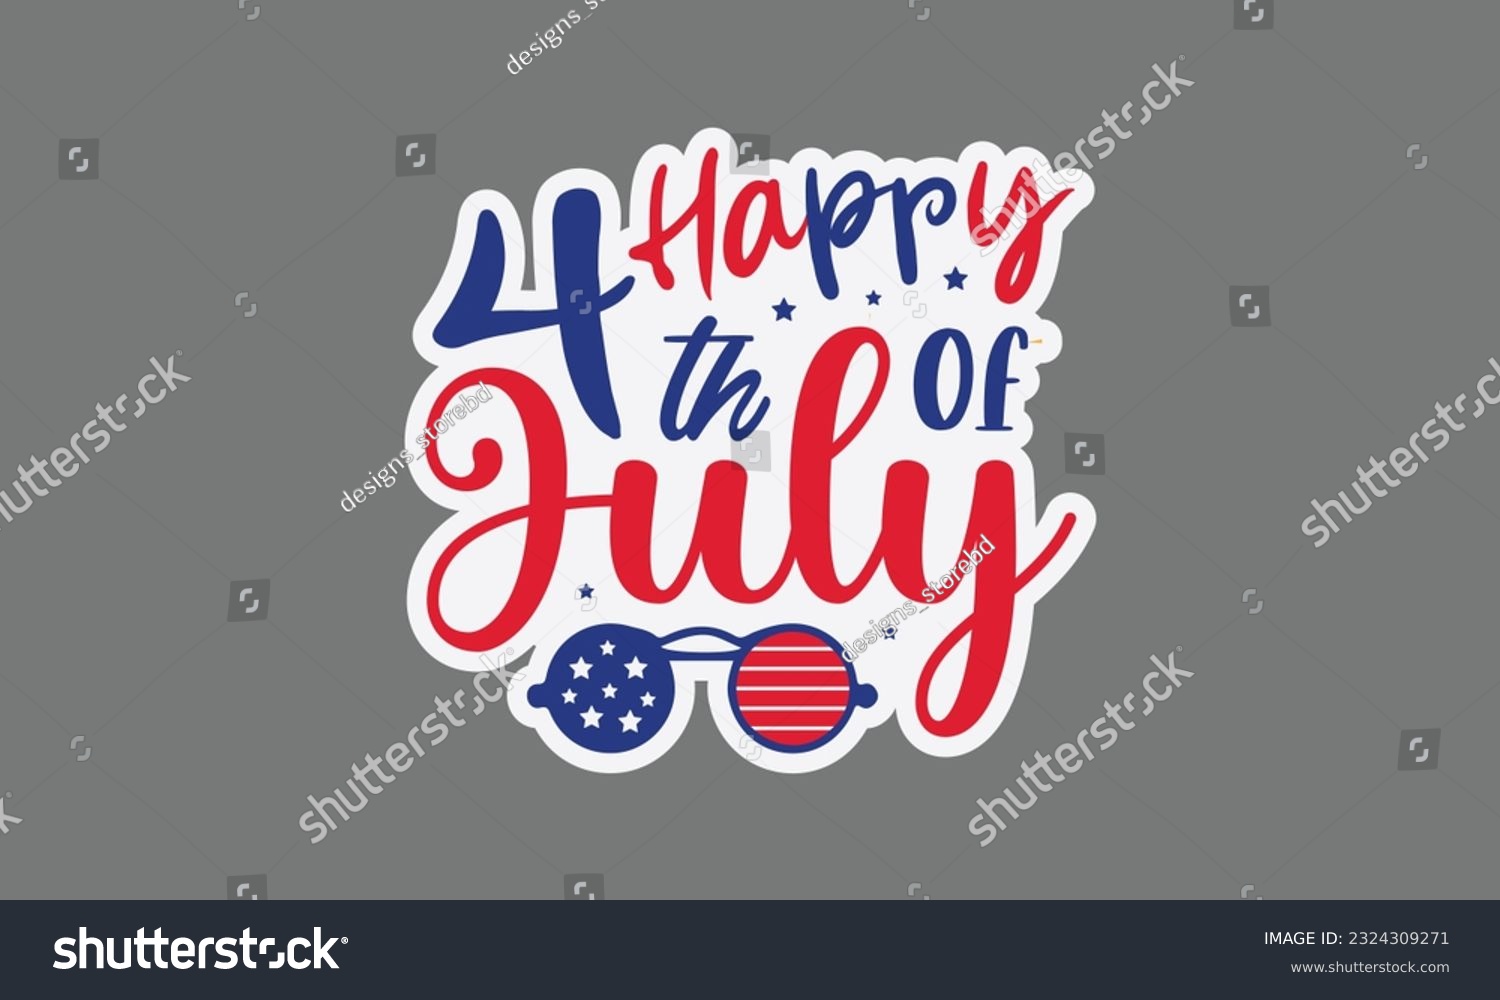 SVG of Happy 4th of july svg, 4th of July svg, Patriotic , Happy 4th Of July, America shirt , Fourth of July sticker, independence day usa memorial day typography tshirt design vector file svg